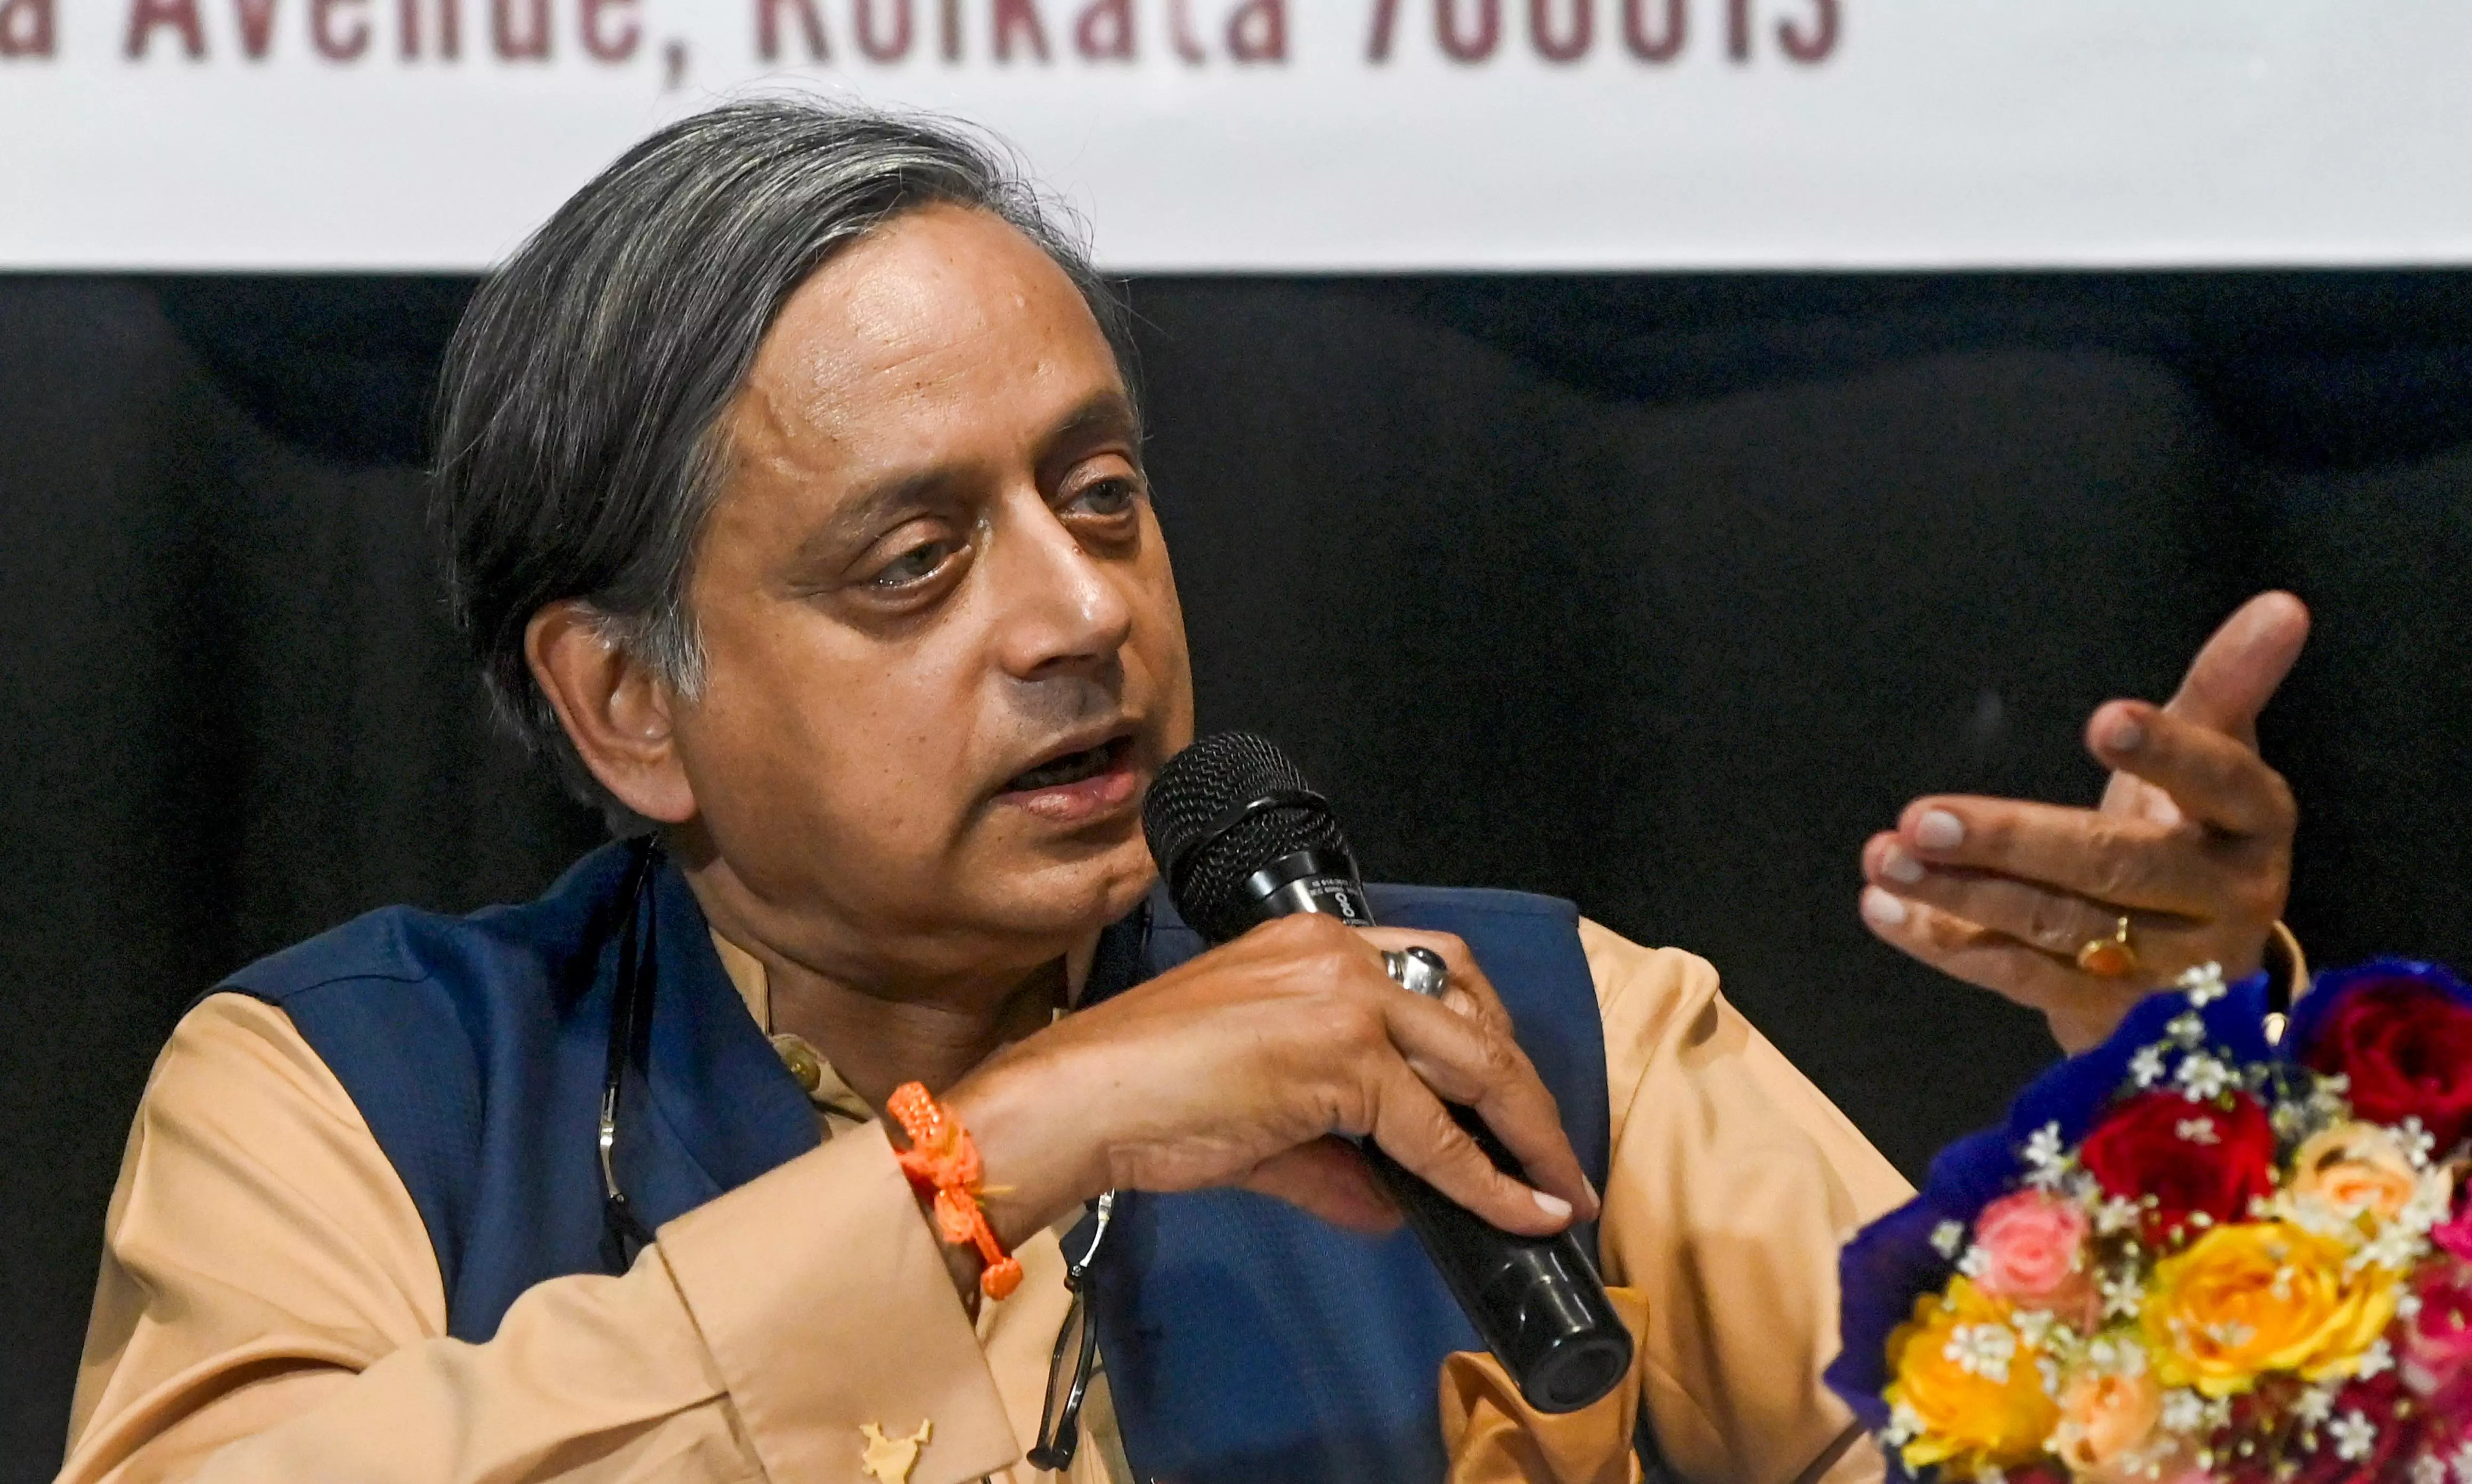 Oppn leaders presence at Ayodhya may have placed them in role supporting PM: Tharoor